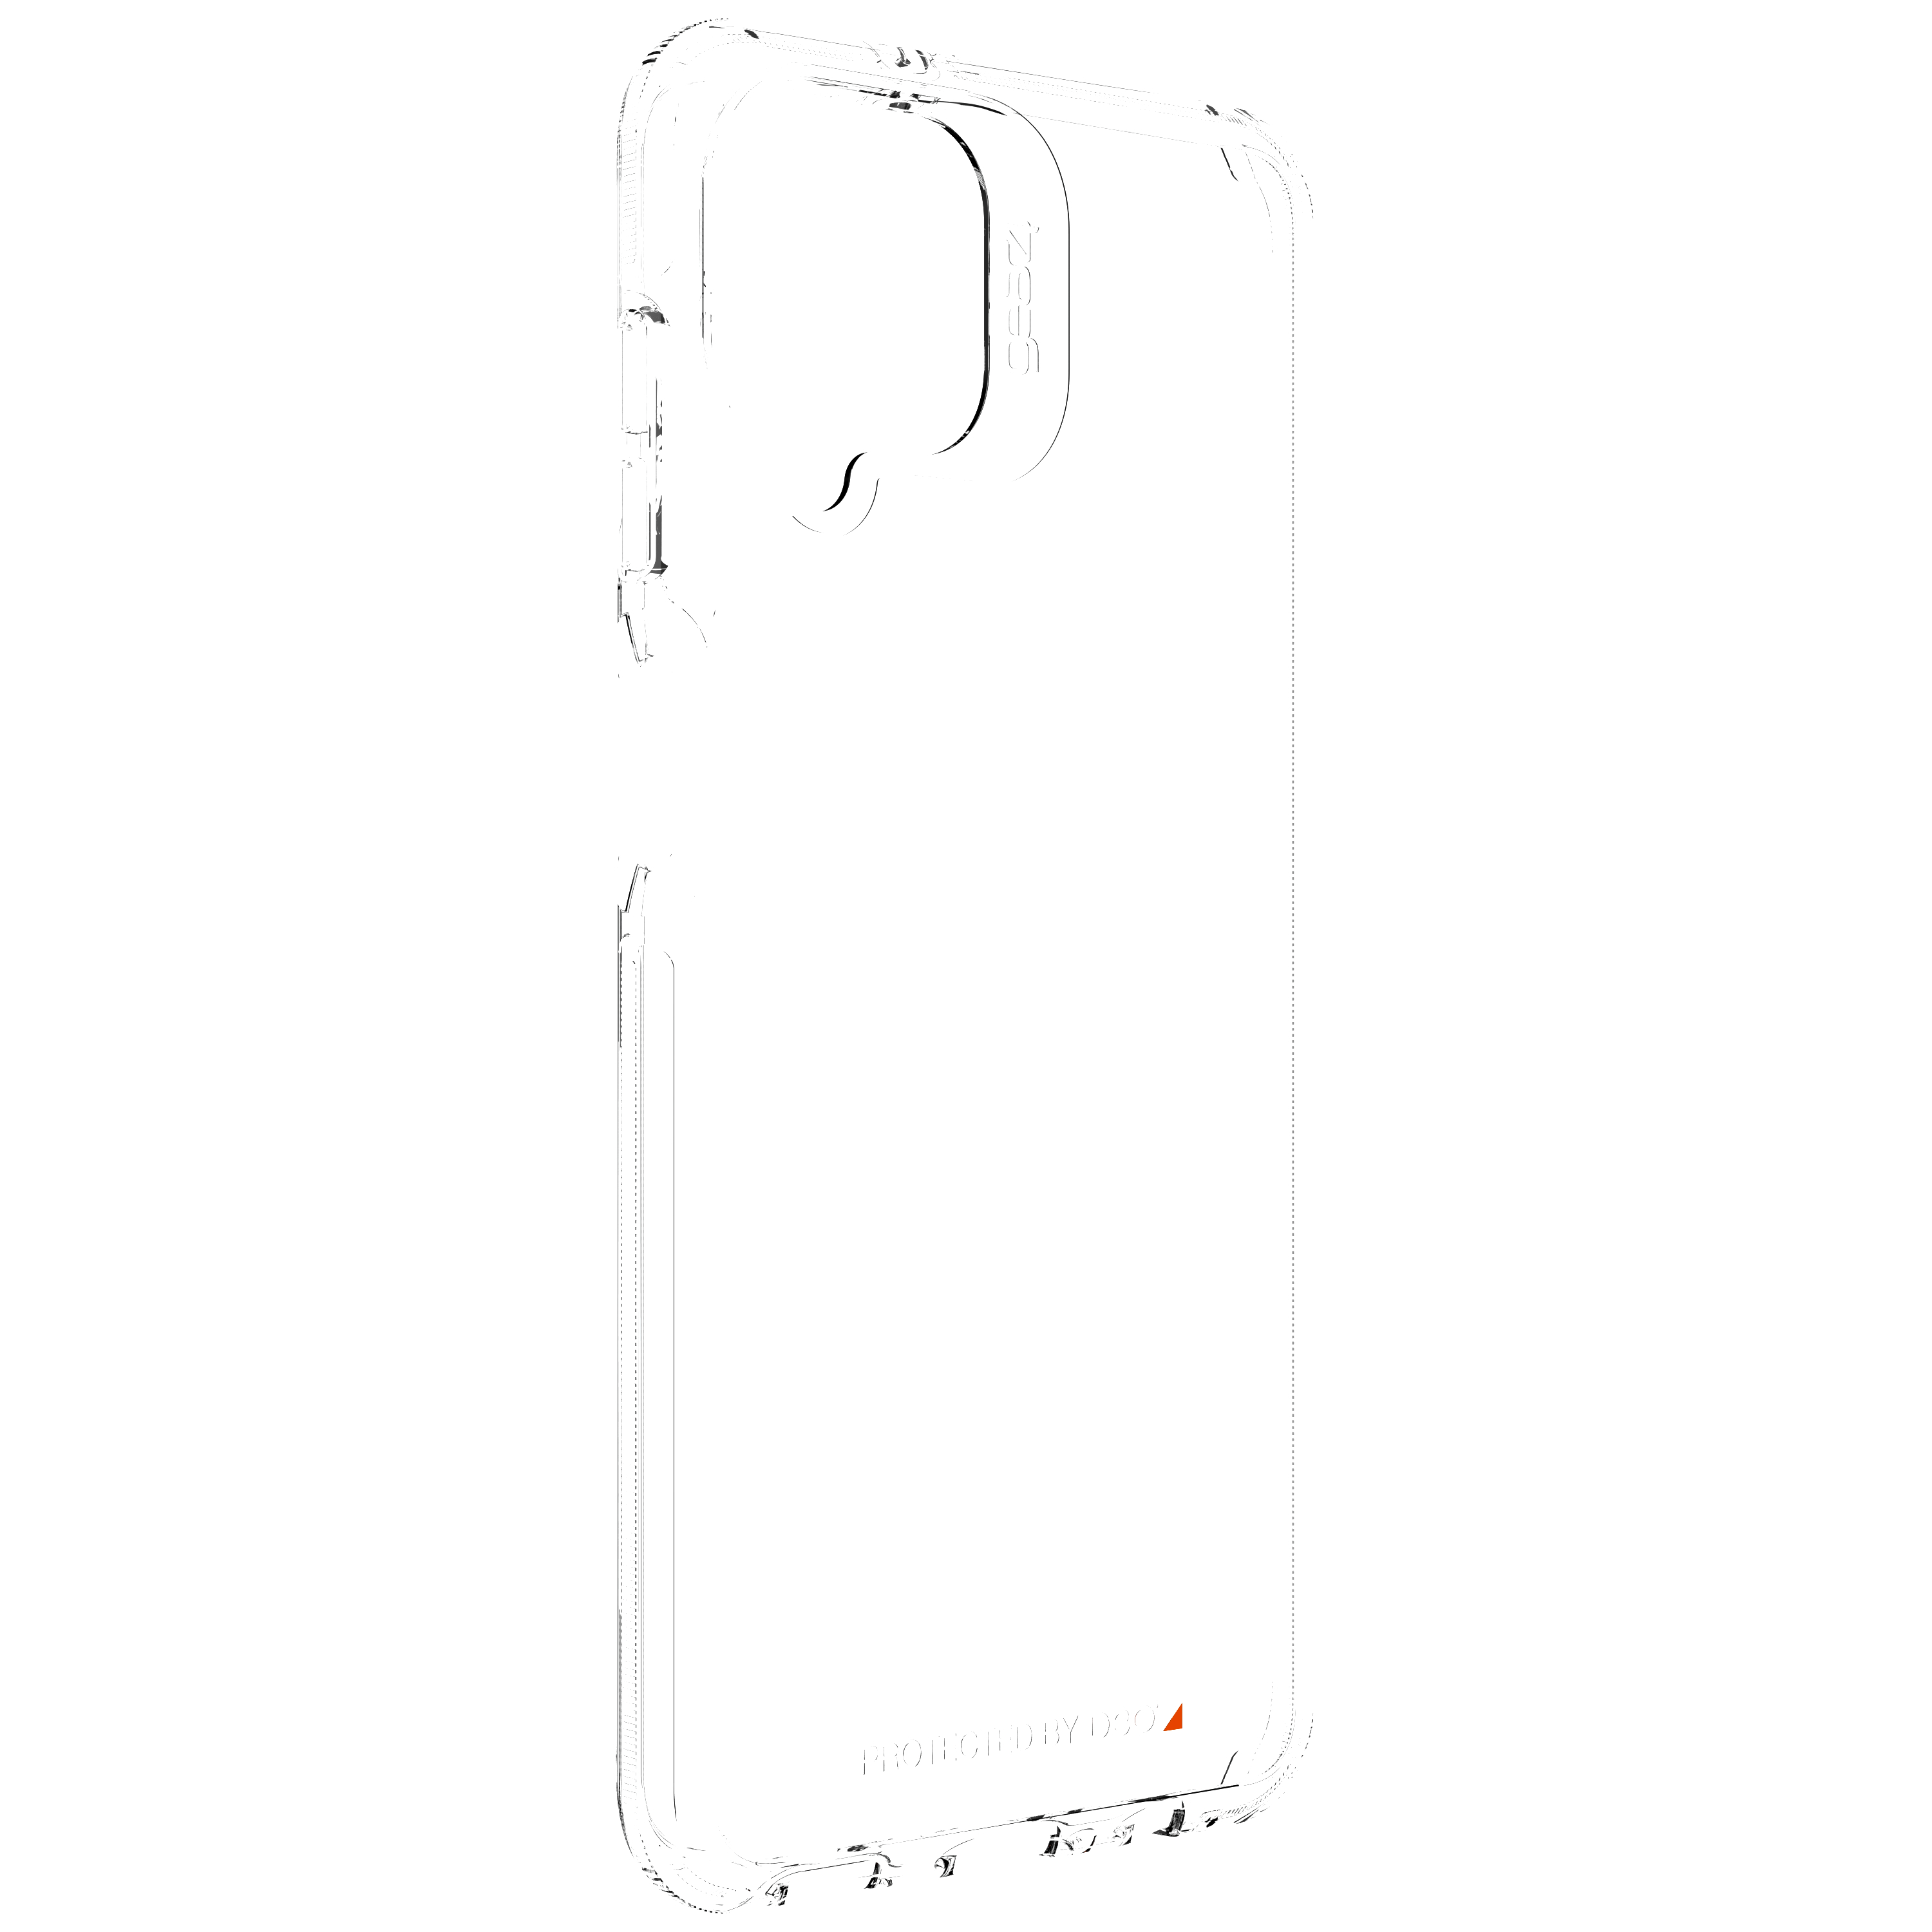 Samsung, Transparent Palace, GEAR4 A12, Galaxy Backcover, Cases-Crystal